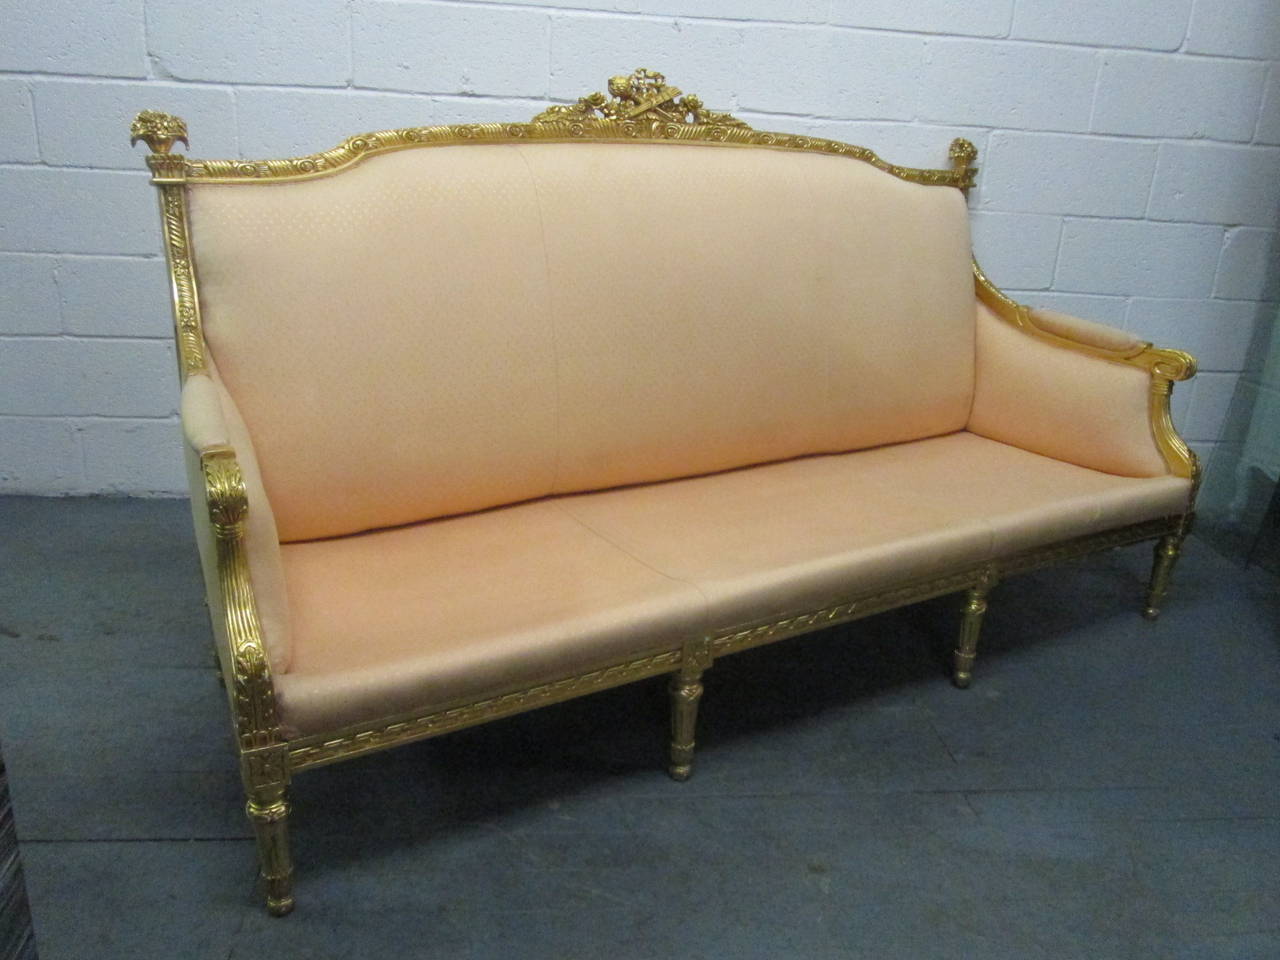 Gilt Louis XIV Style Sofa For Sale at 1stdibs